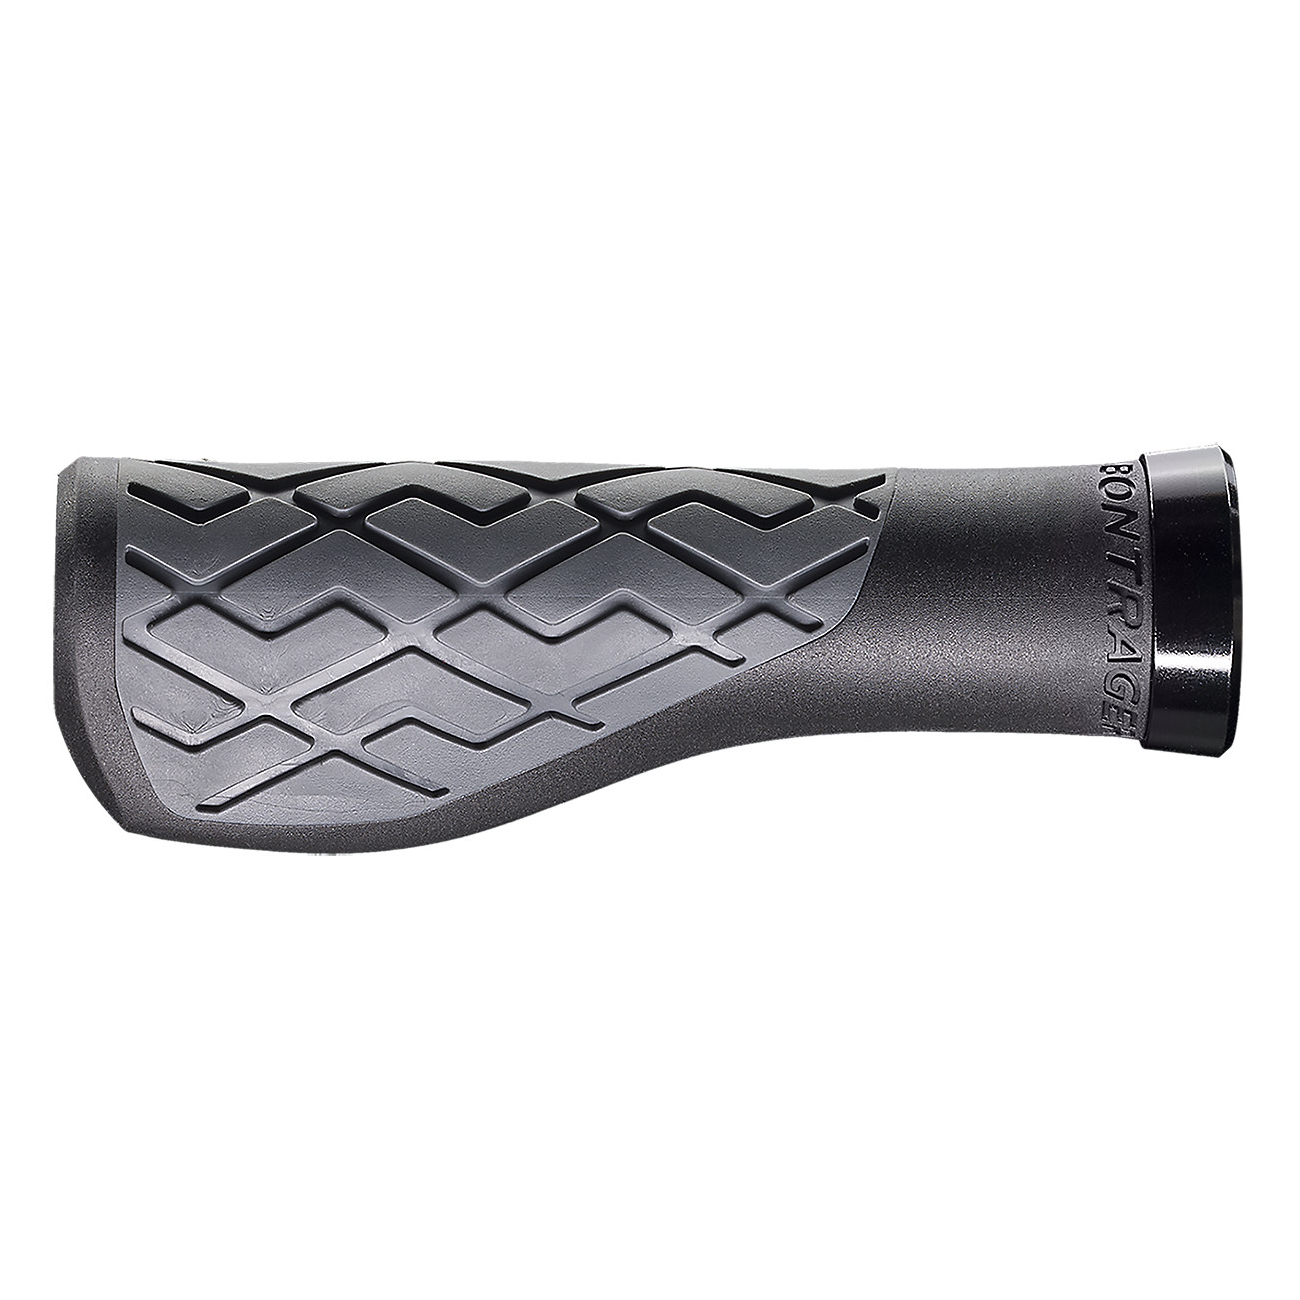 Picture of Bontrager XR Endurance Elite Handlebar Grips - Ocean Recycled (ORP) - 130/130 mm | Small - Black